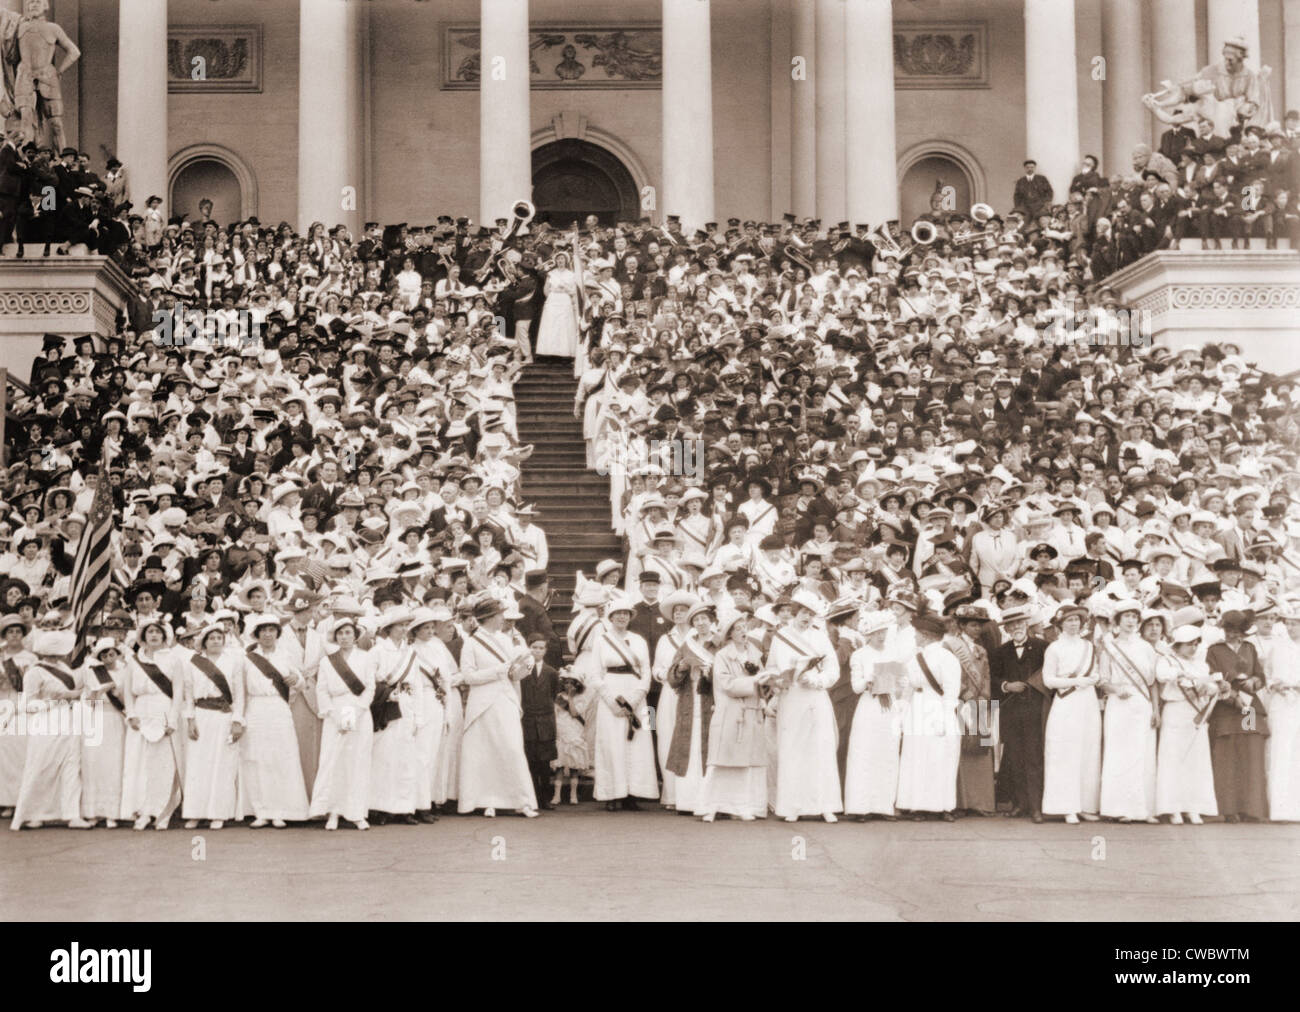 Women's Suffrage envoys from many states brought petitions to Congress. Five thousand women massed on and about the East Steps Stock Photo